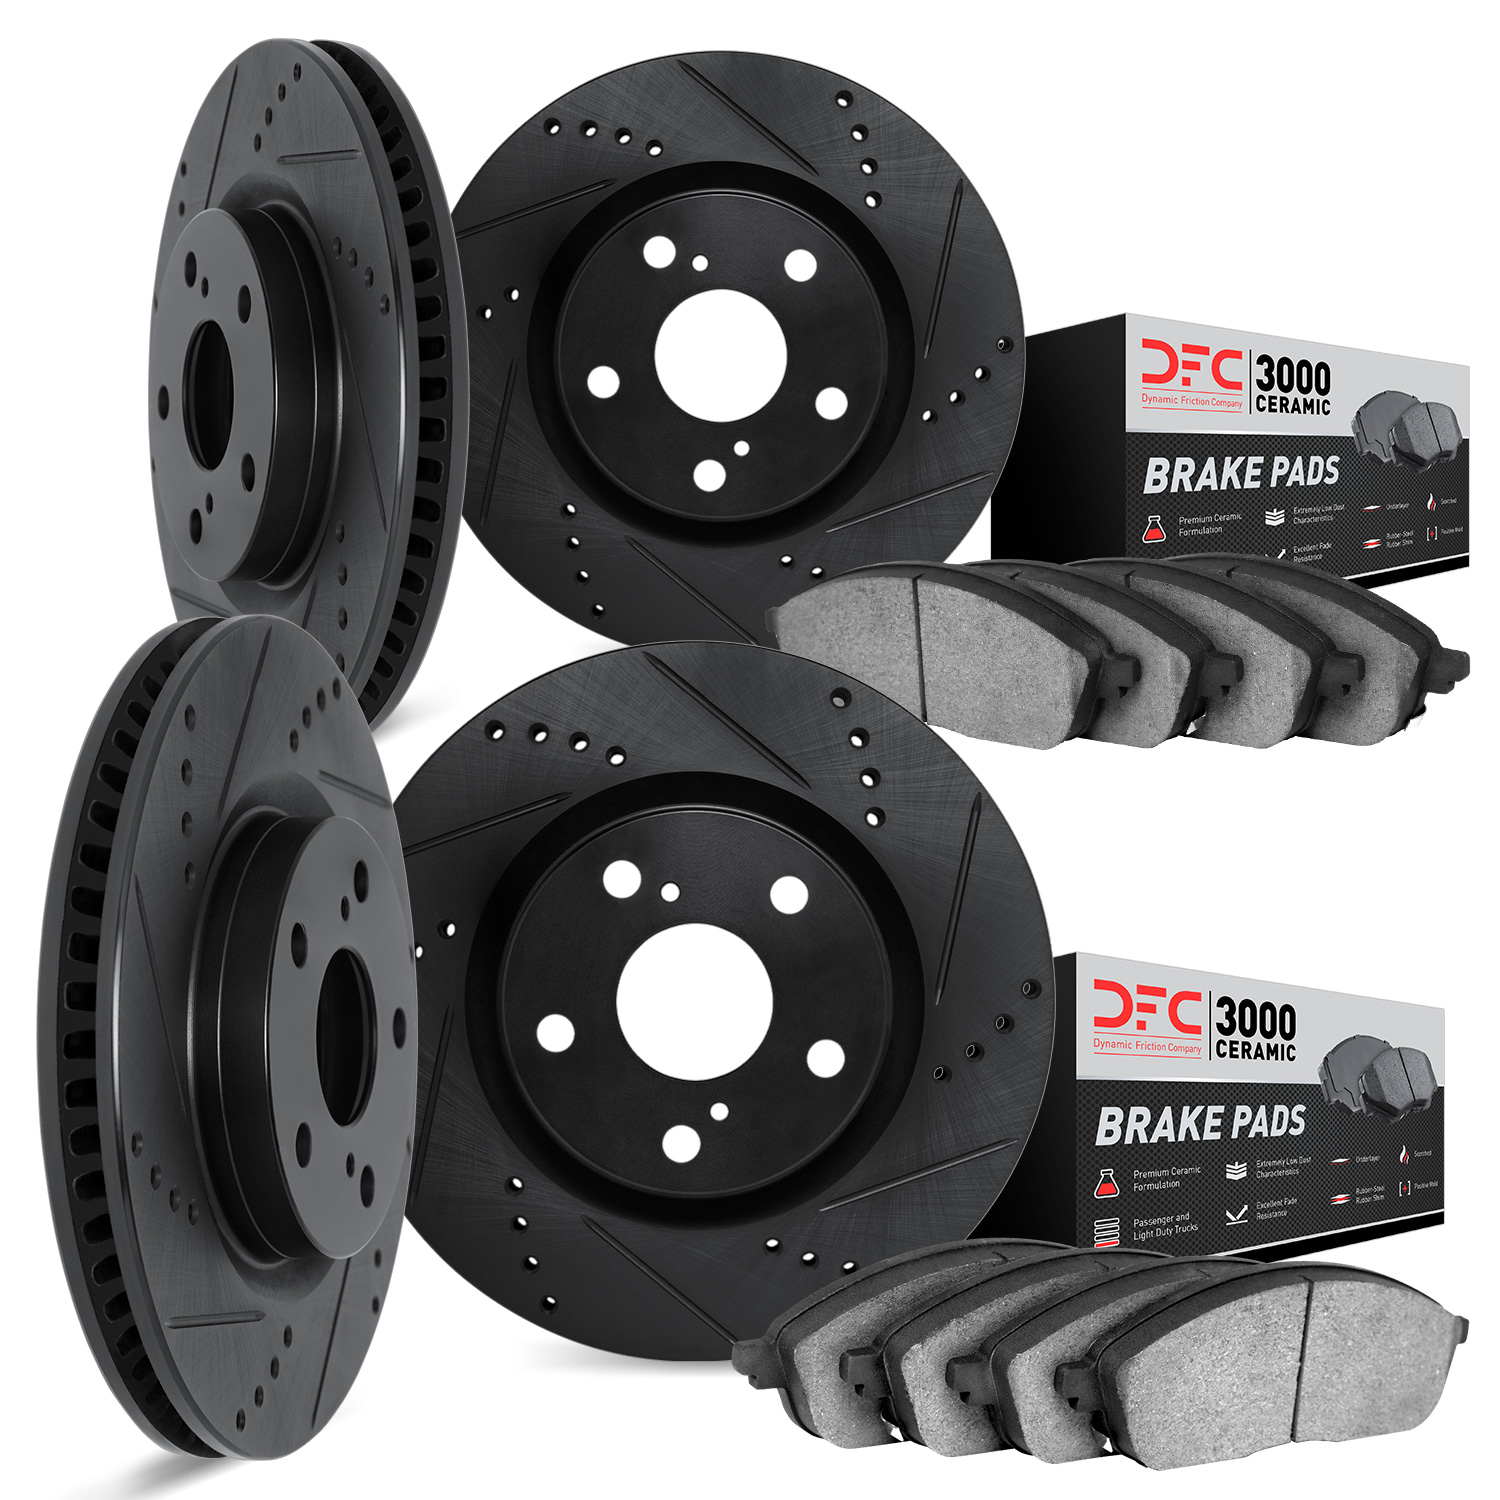 8304-45003 Drilled/Slotted Brake Rotors with 3000-Series Ceramic Brake Pads Kit [Black], 1990-1990 GM, Position: Front and Rear